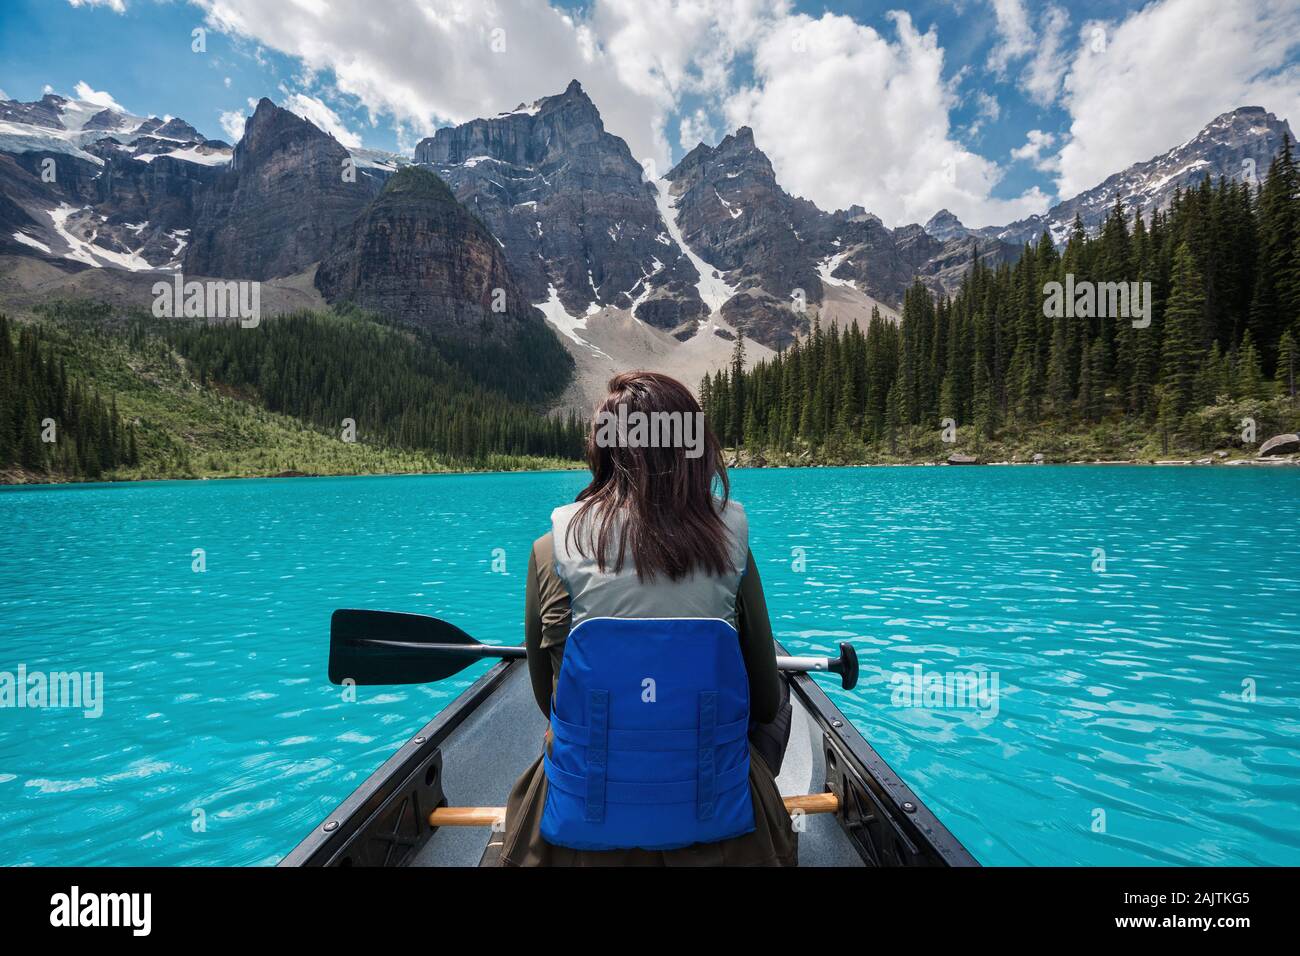 Tourist canoeing on Moraine Lake during summer in Banff National Park, Canadian Rockies, Alberta, Canada. Stock Photo